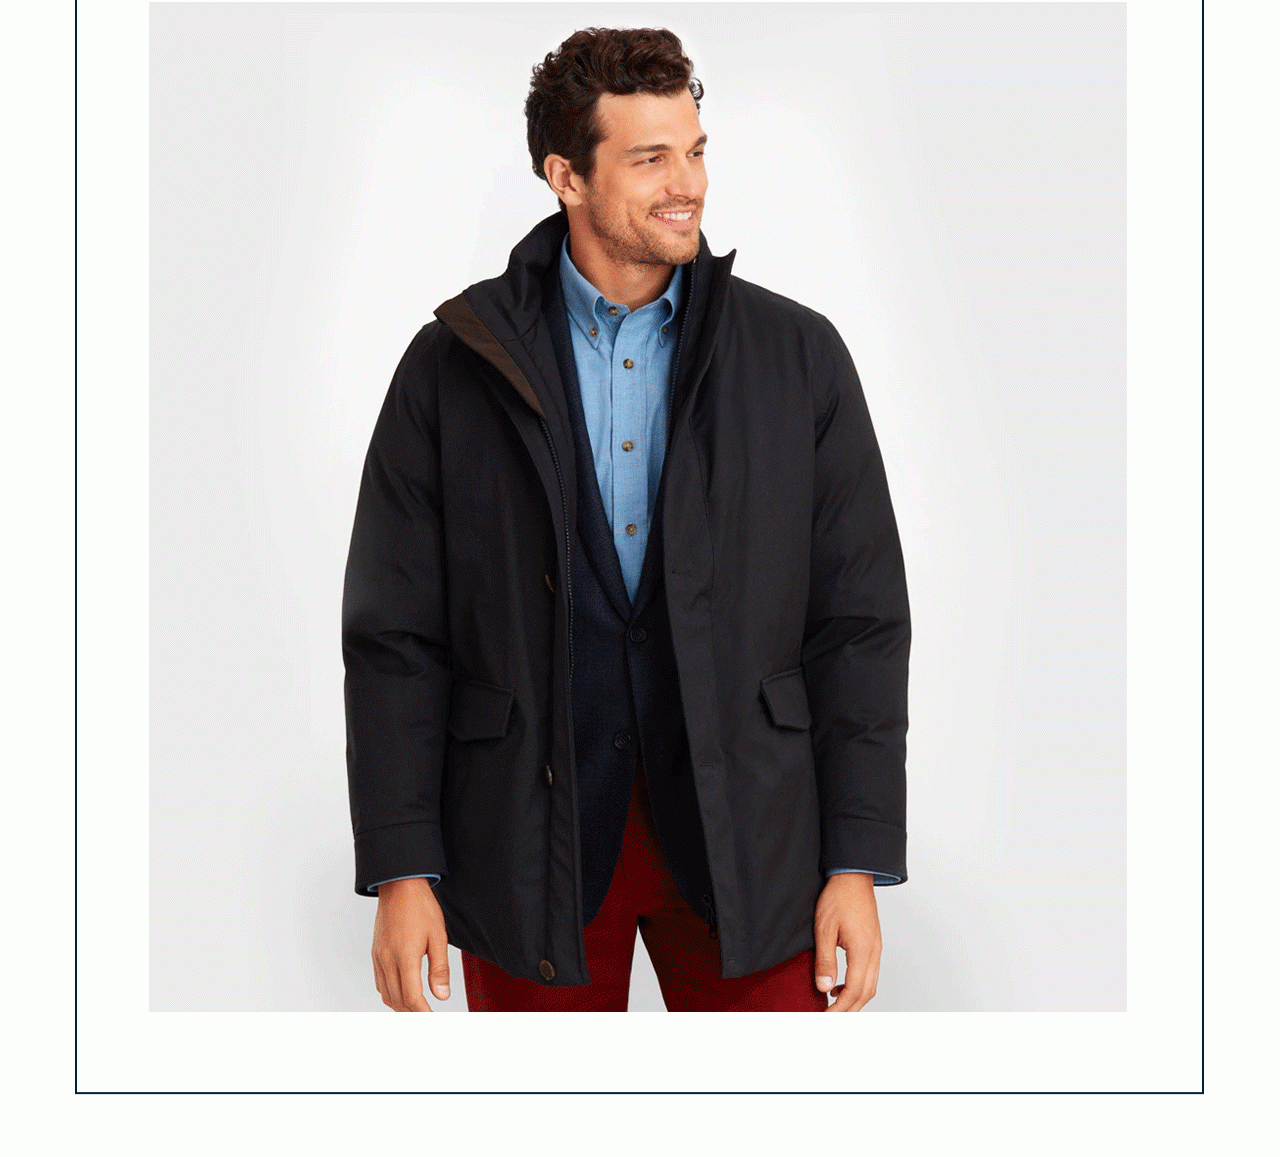 Brave the Elements in Style Don't miss the final days to save on winter's best outerwear. 40% Off - Ending Soon